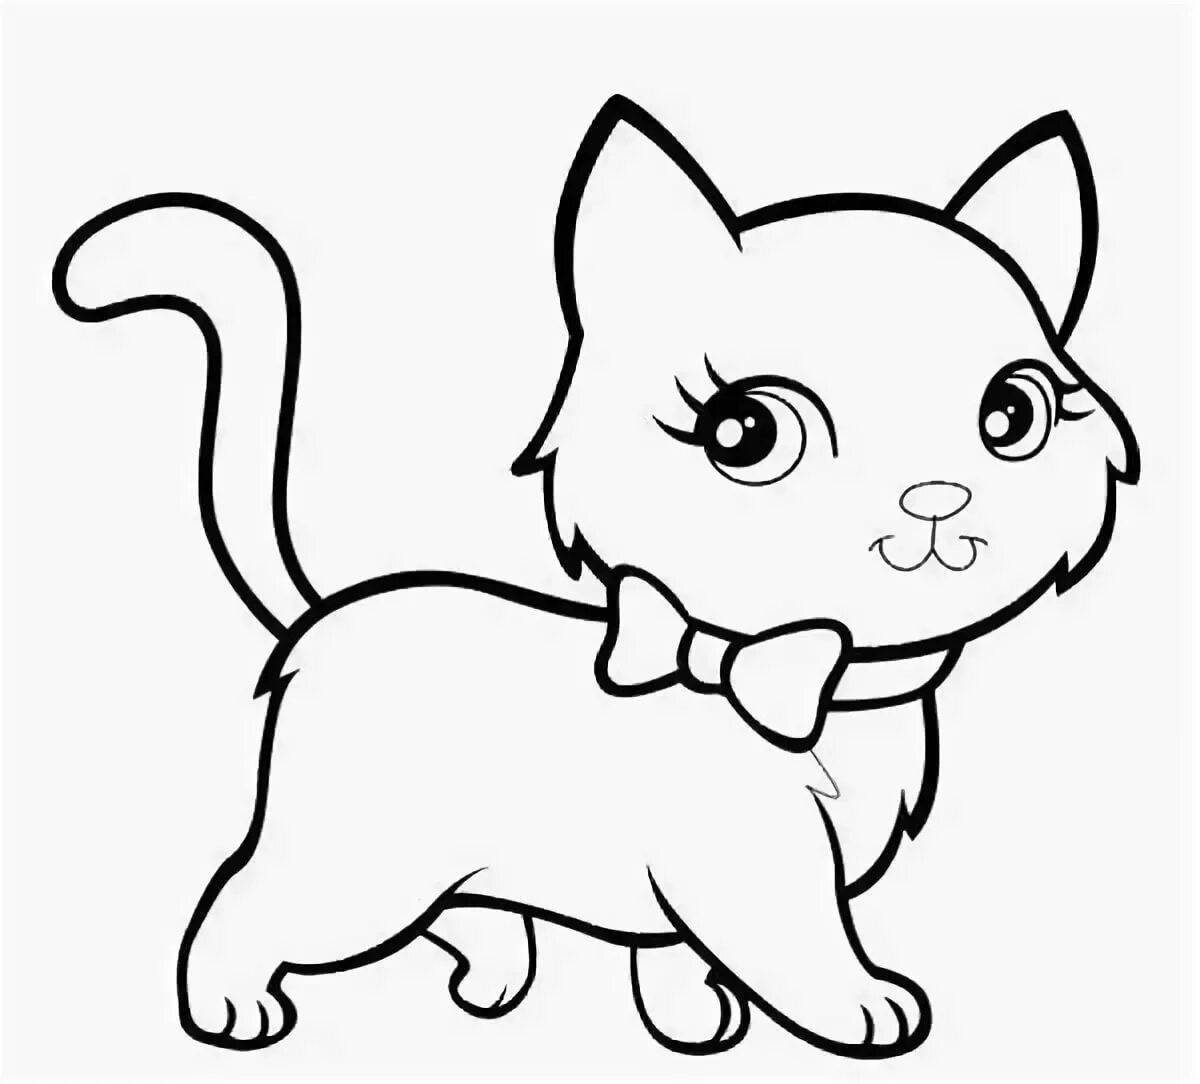 Artistic cat coloring for kids